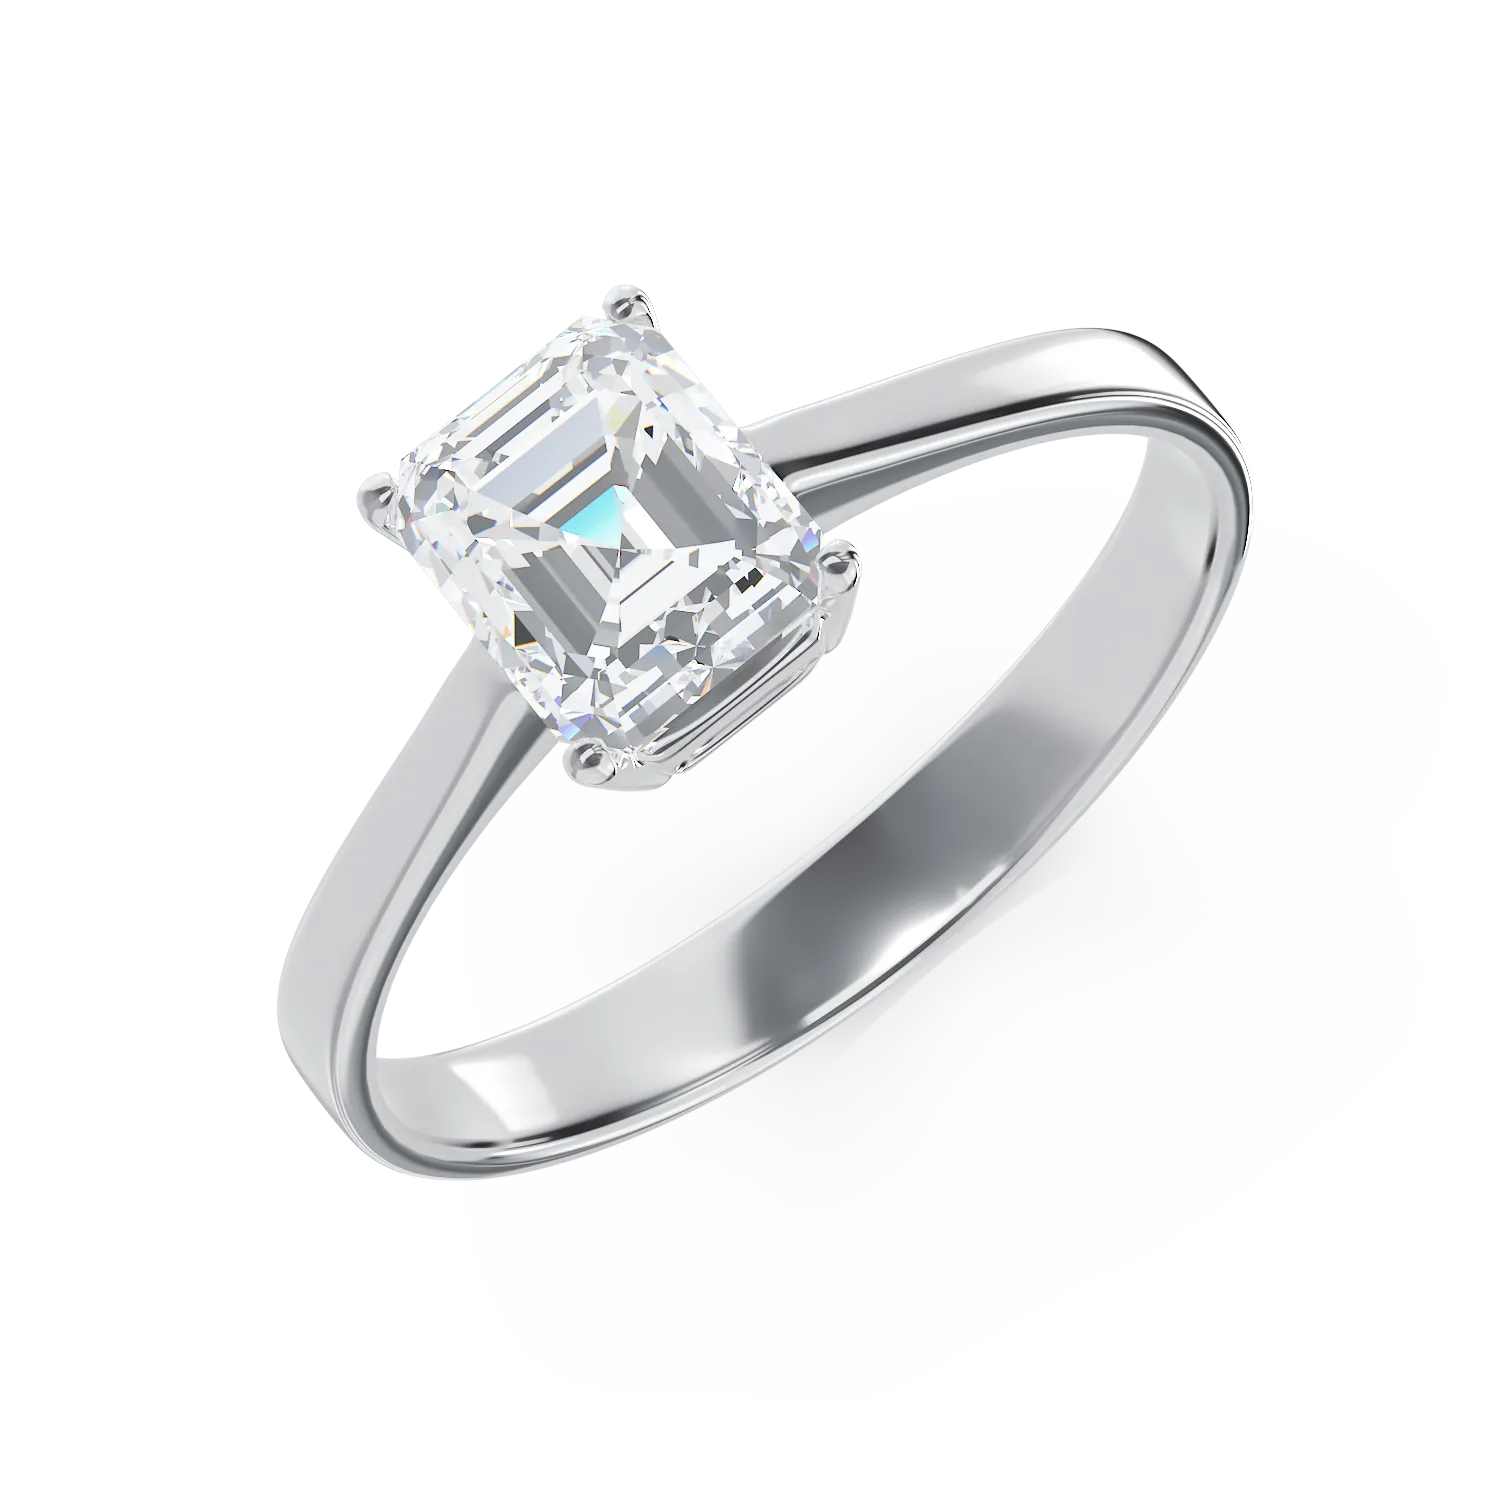 18K white gold engagement ring with a 1.11ct solitaire diamond